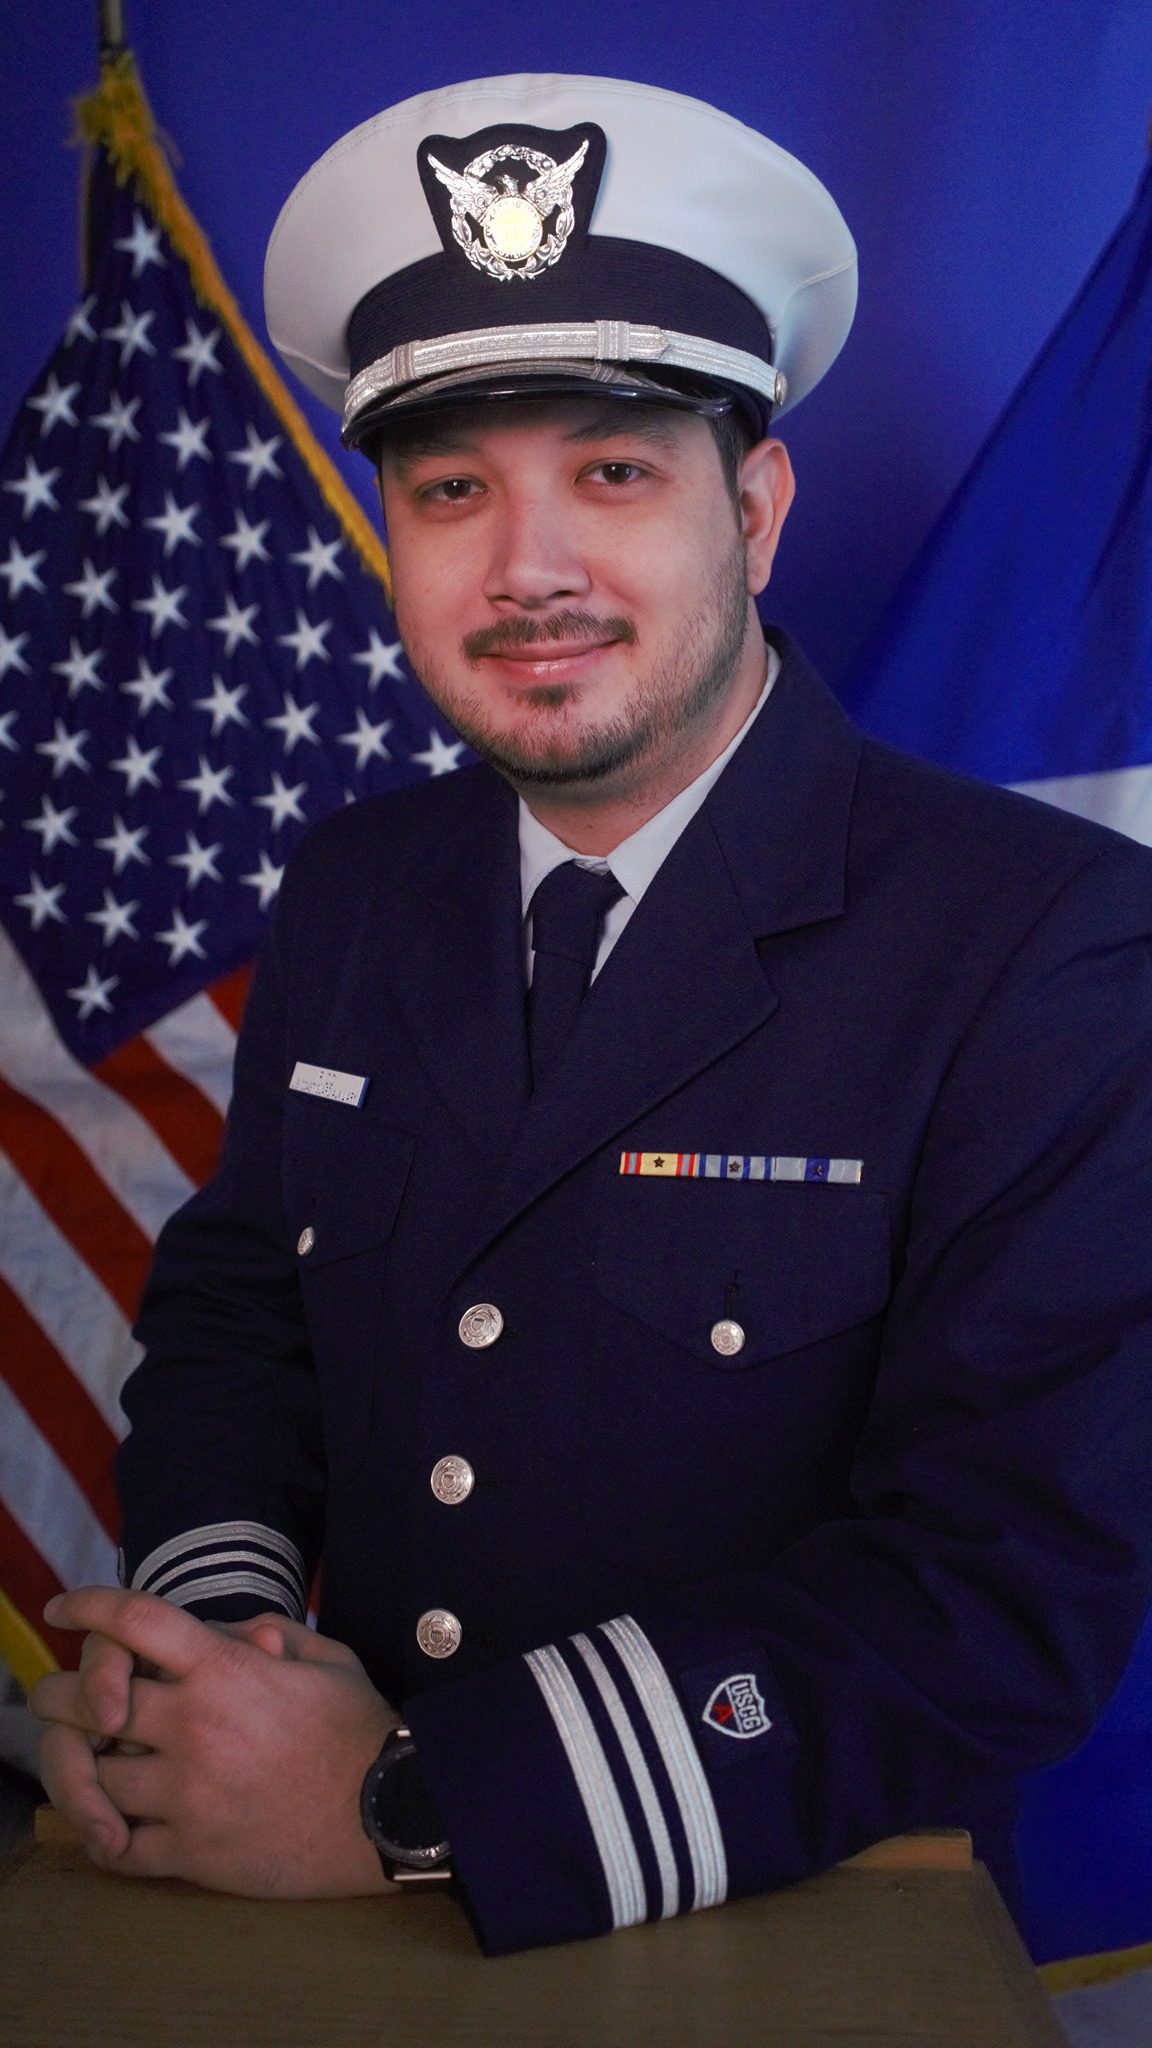 Auxiliarist Alexander R. Rico, recipient of the Commodore Charles S. Greanoff Inspirational Leadership Award. Official U.S. Coast Guard photo. 